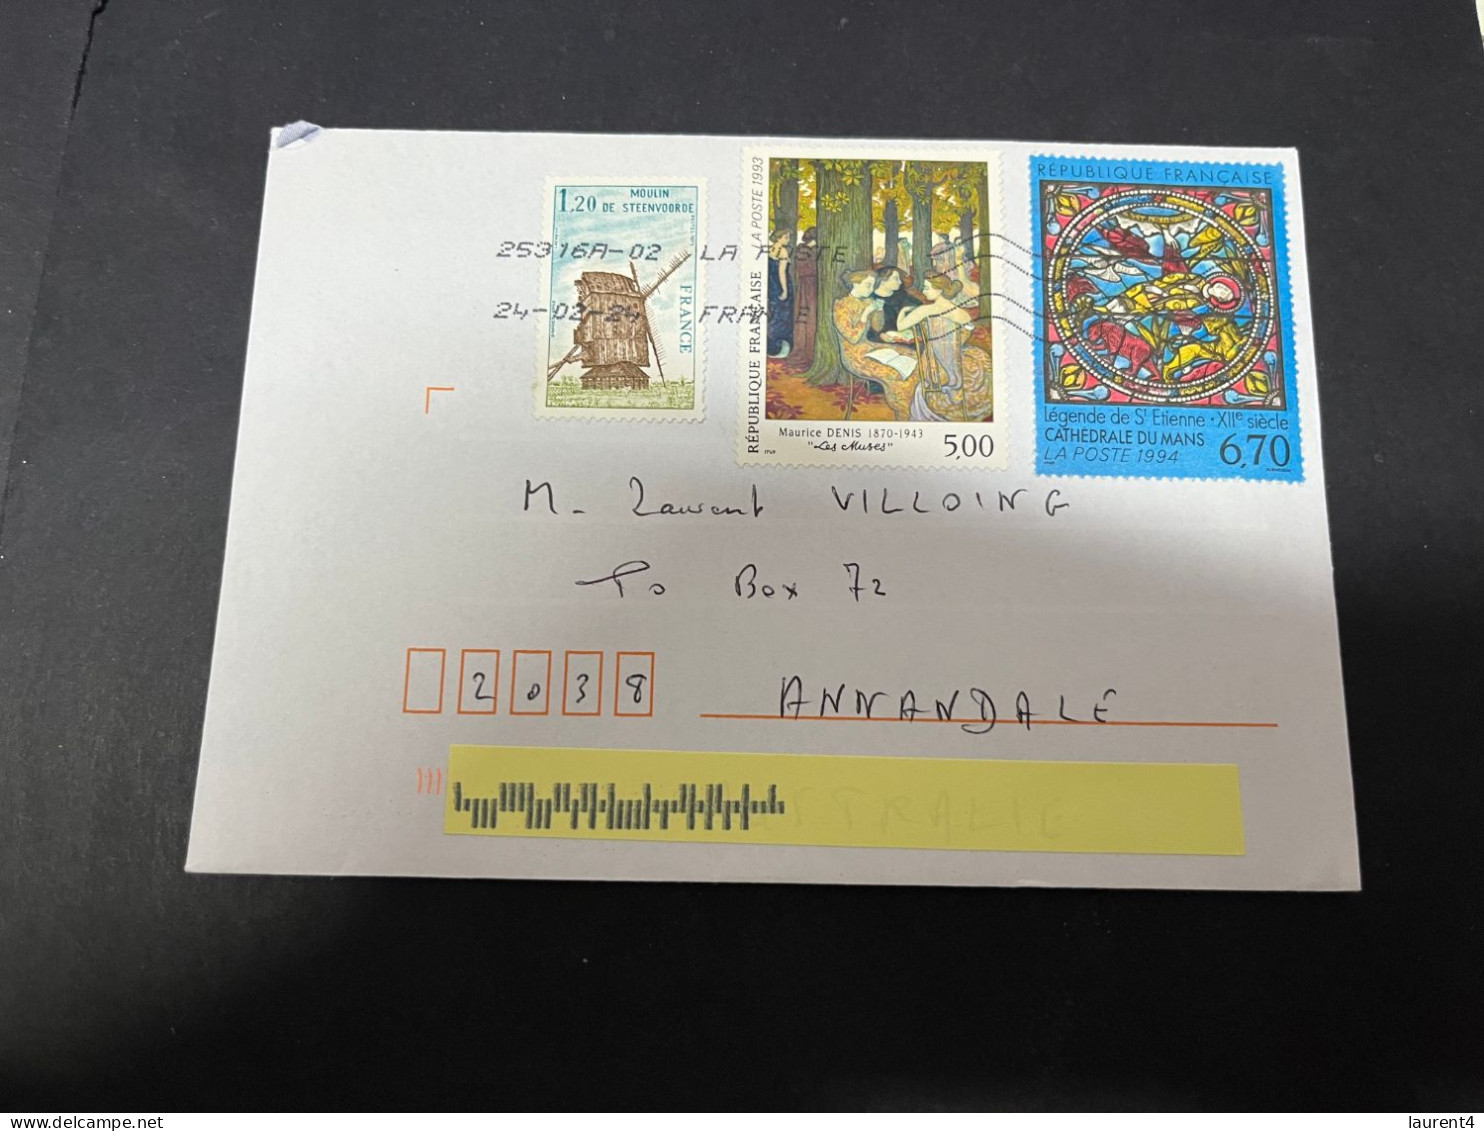 30-4-2023 (3 Z 27) Letter Posted From France To Australia In 2024 (2 Covers) (each Cover Has Many Stamps) - Briefe U. Dokumente